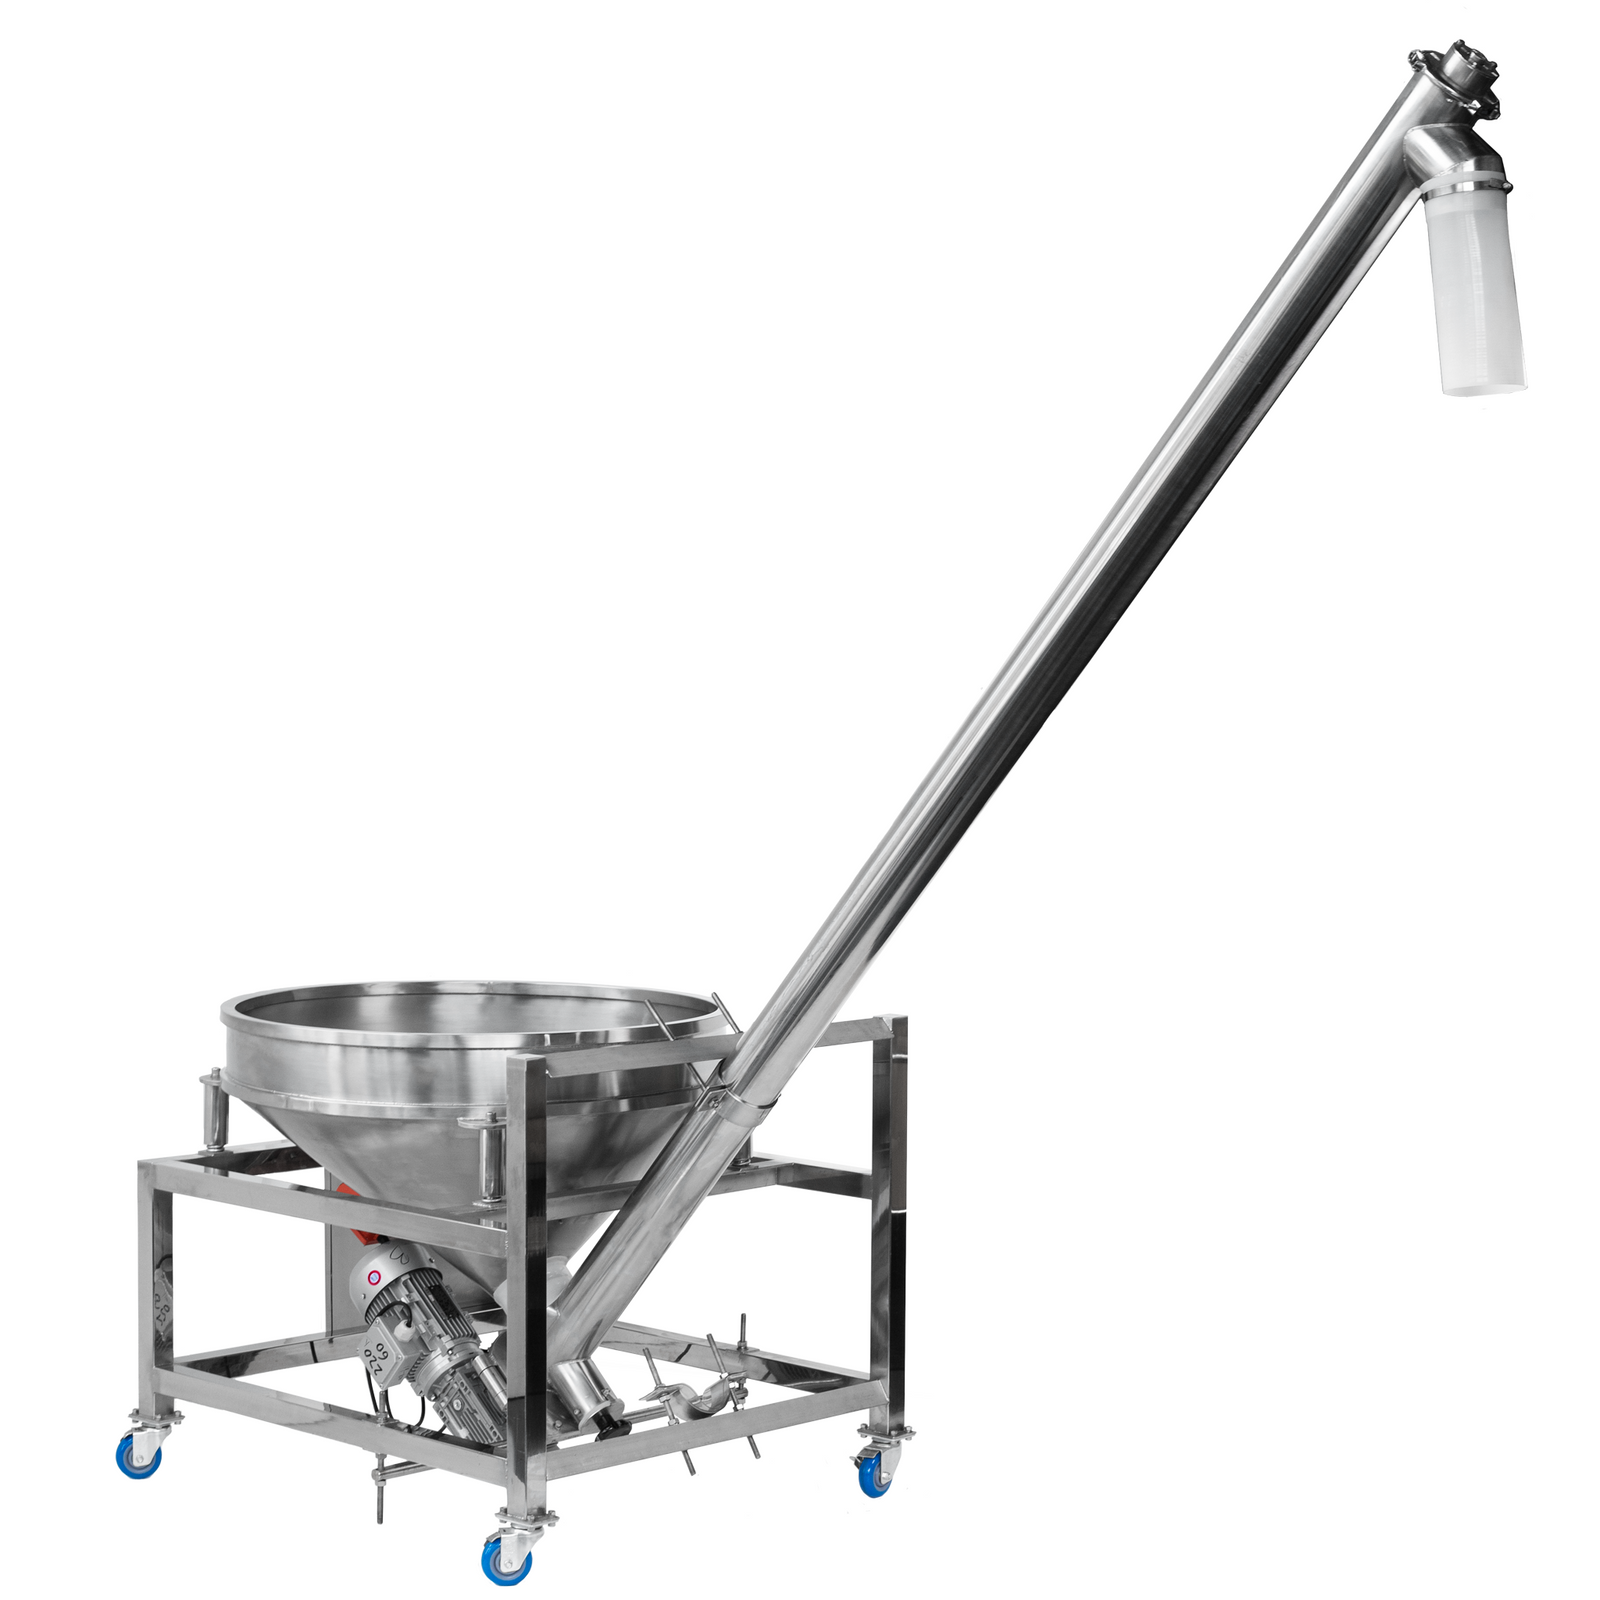 Machine Augers at